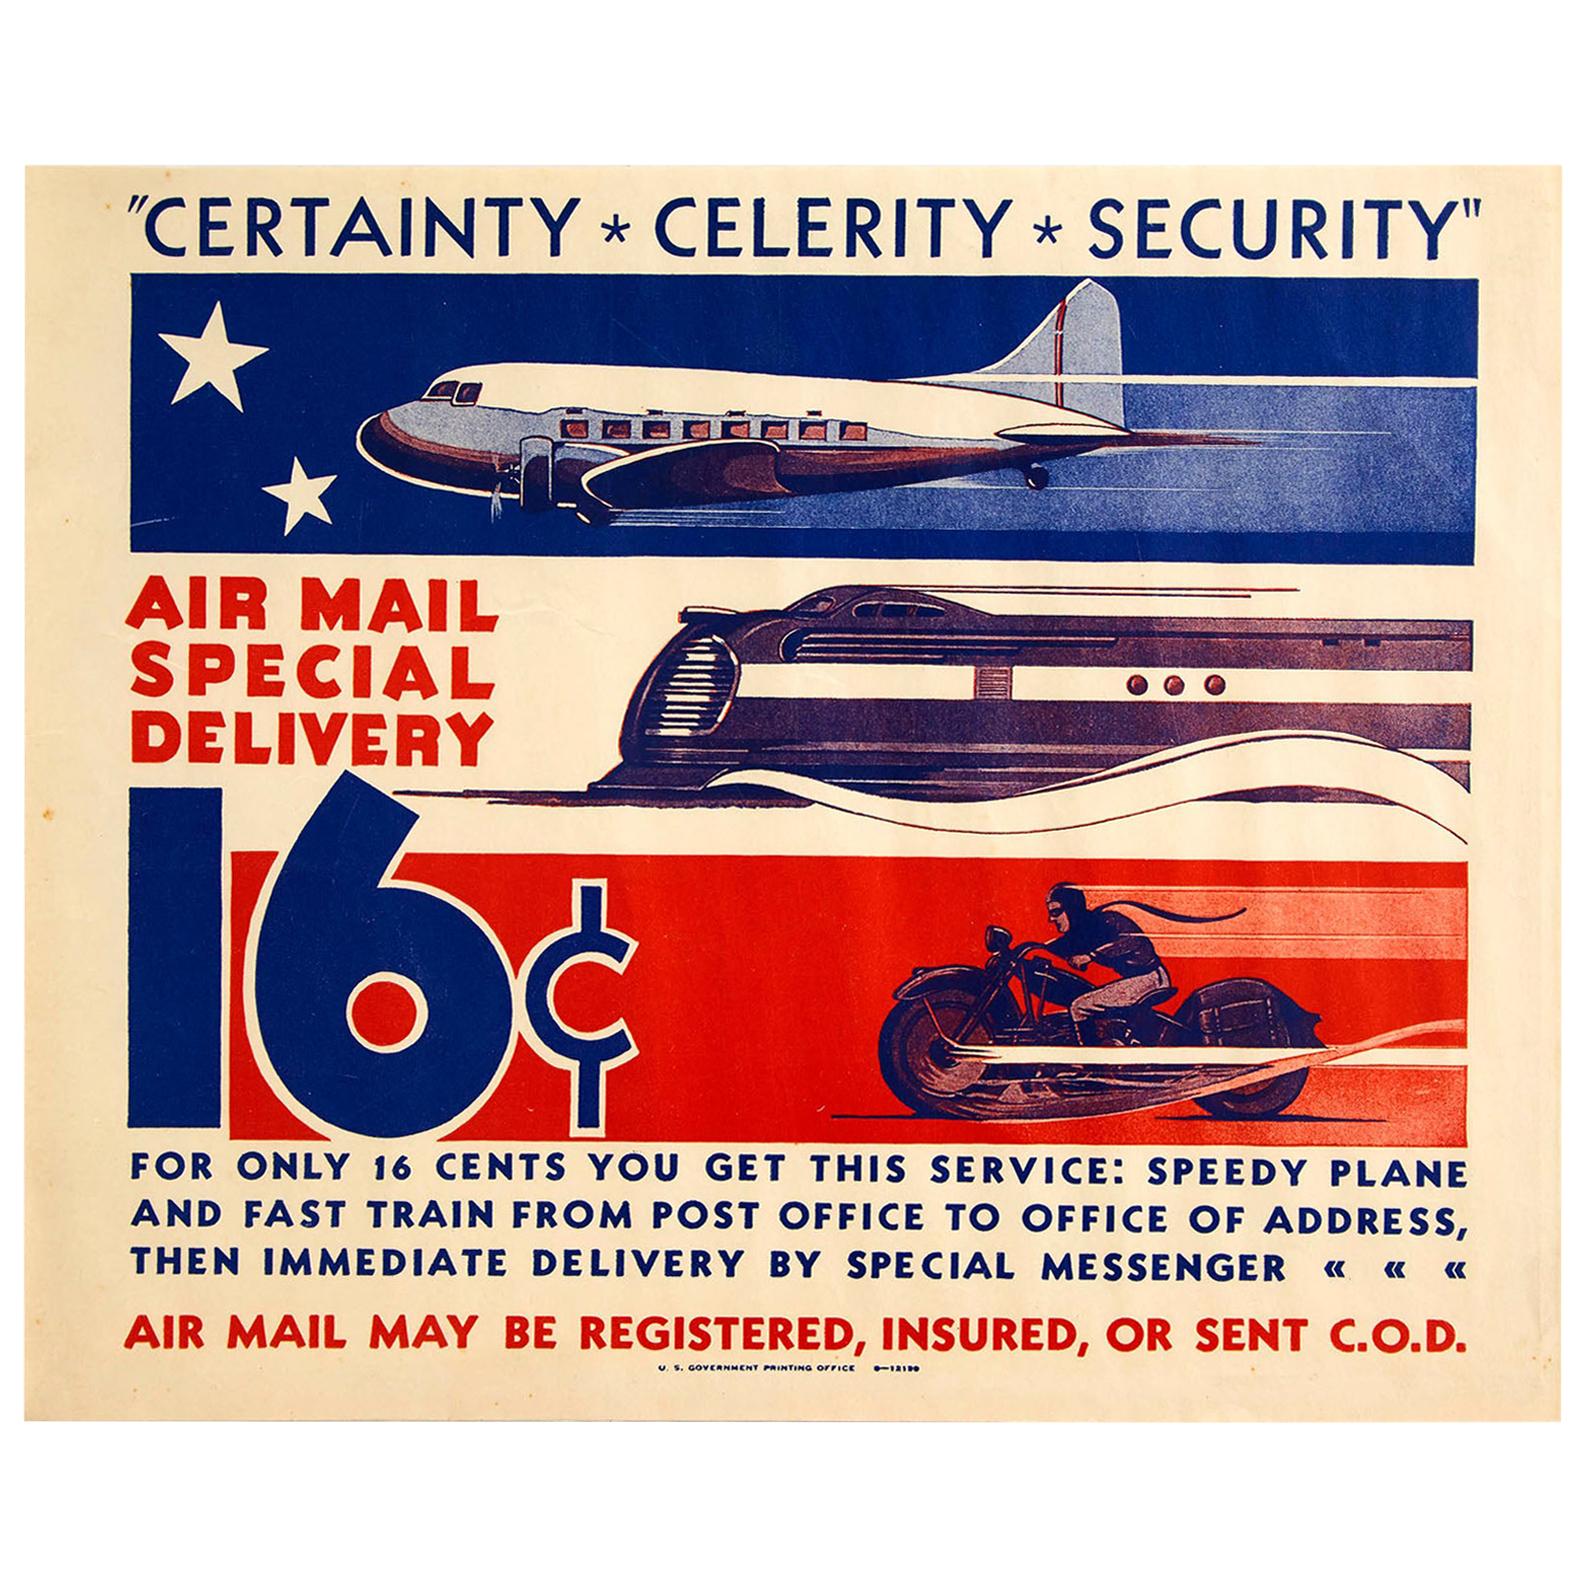 Original Vintage Poster Air Mail Special Delivery US Post Plane Train Motorcycle